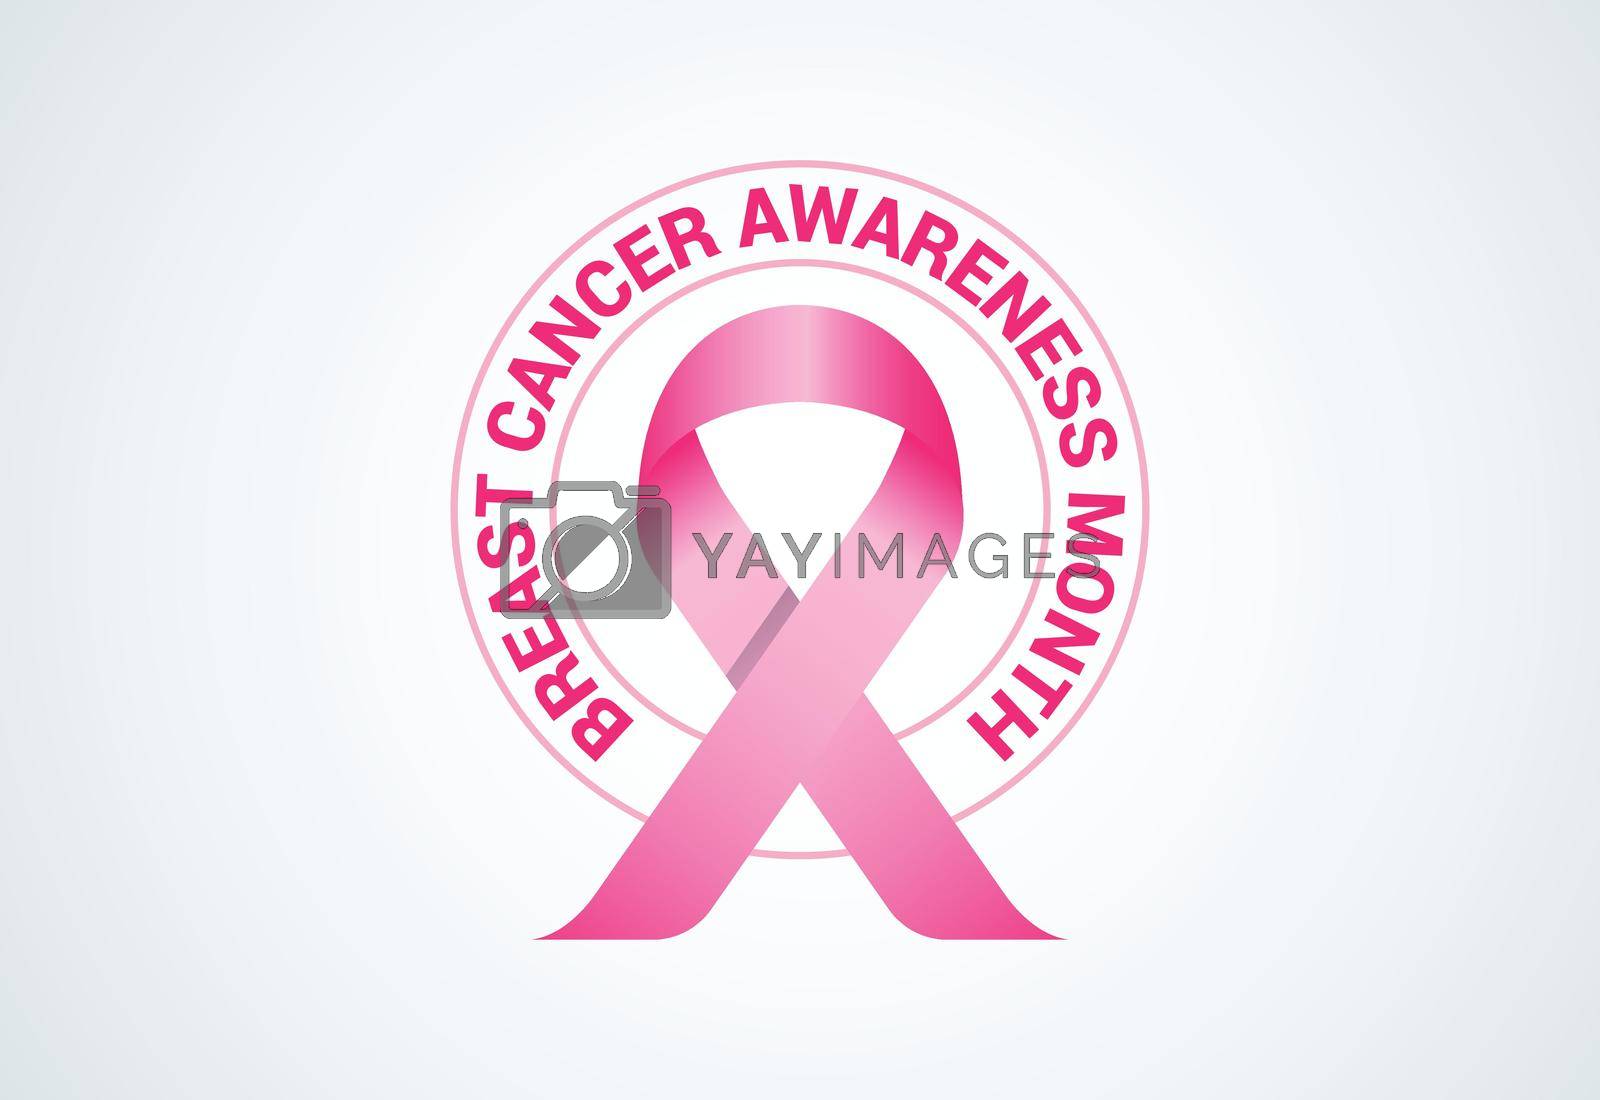 Royalty free image of Breast cancer day. October is breast cancer awareness month. by busrat